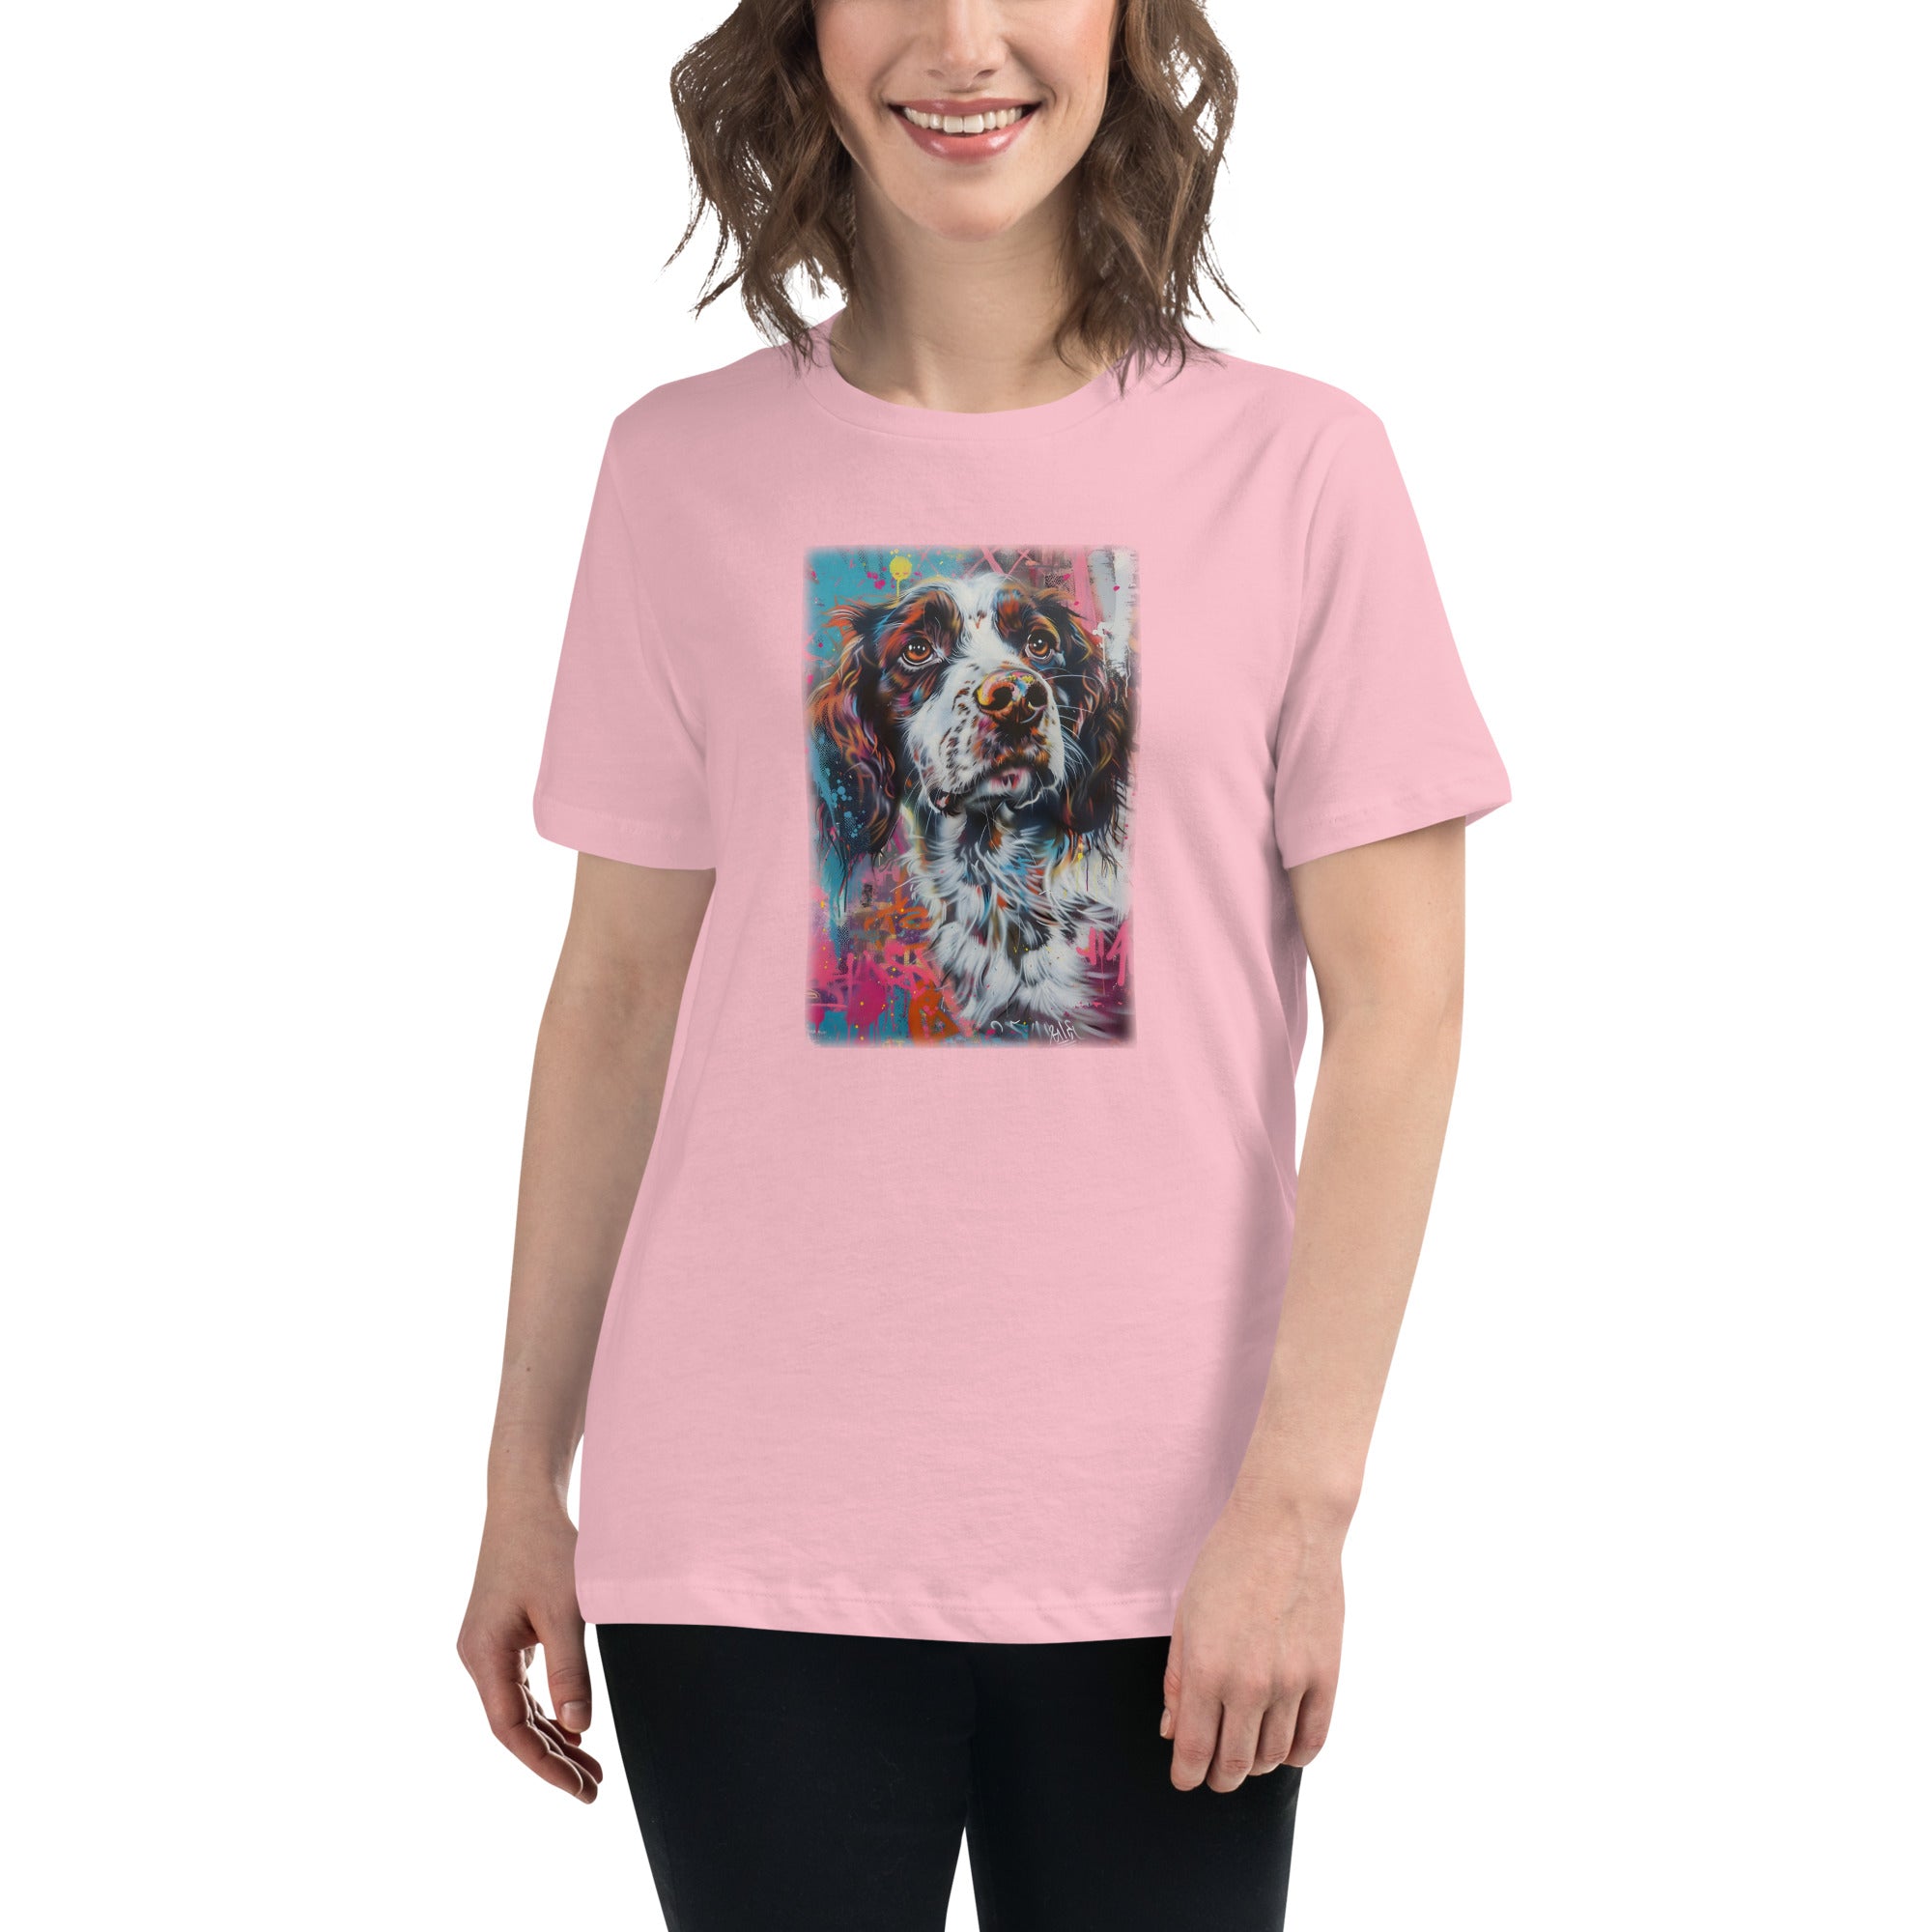 Brittany Spaniel Women's Relaxed T-Shirt